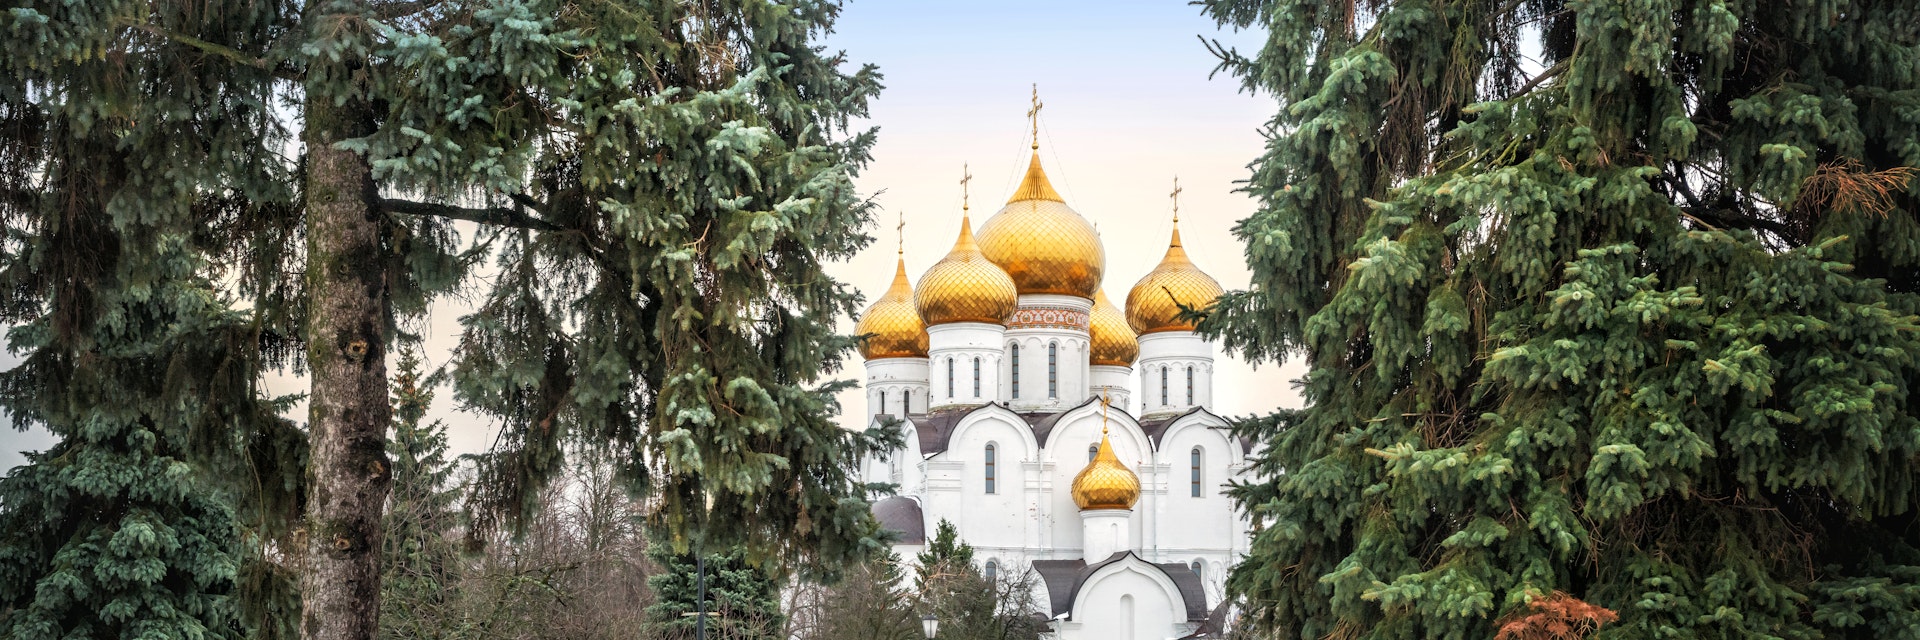 Golden-headed Assumption Cathedral in Yaroslavl among green fir trees on a cloudy winter day